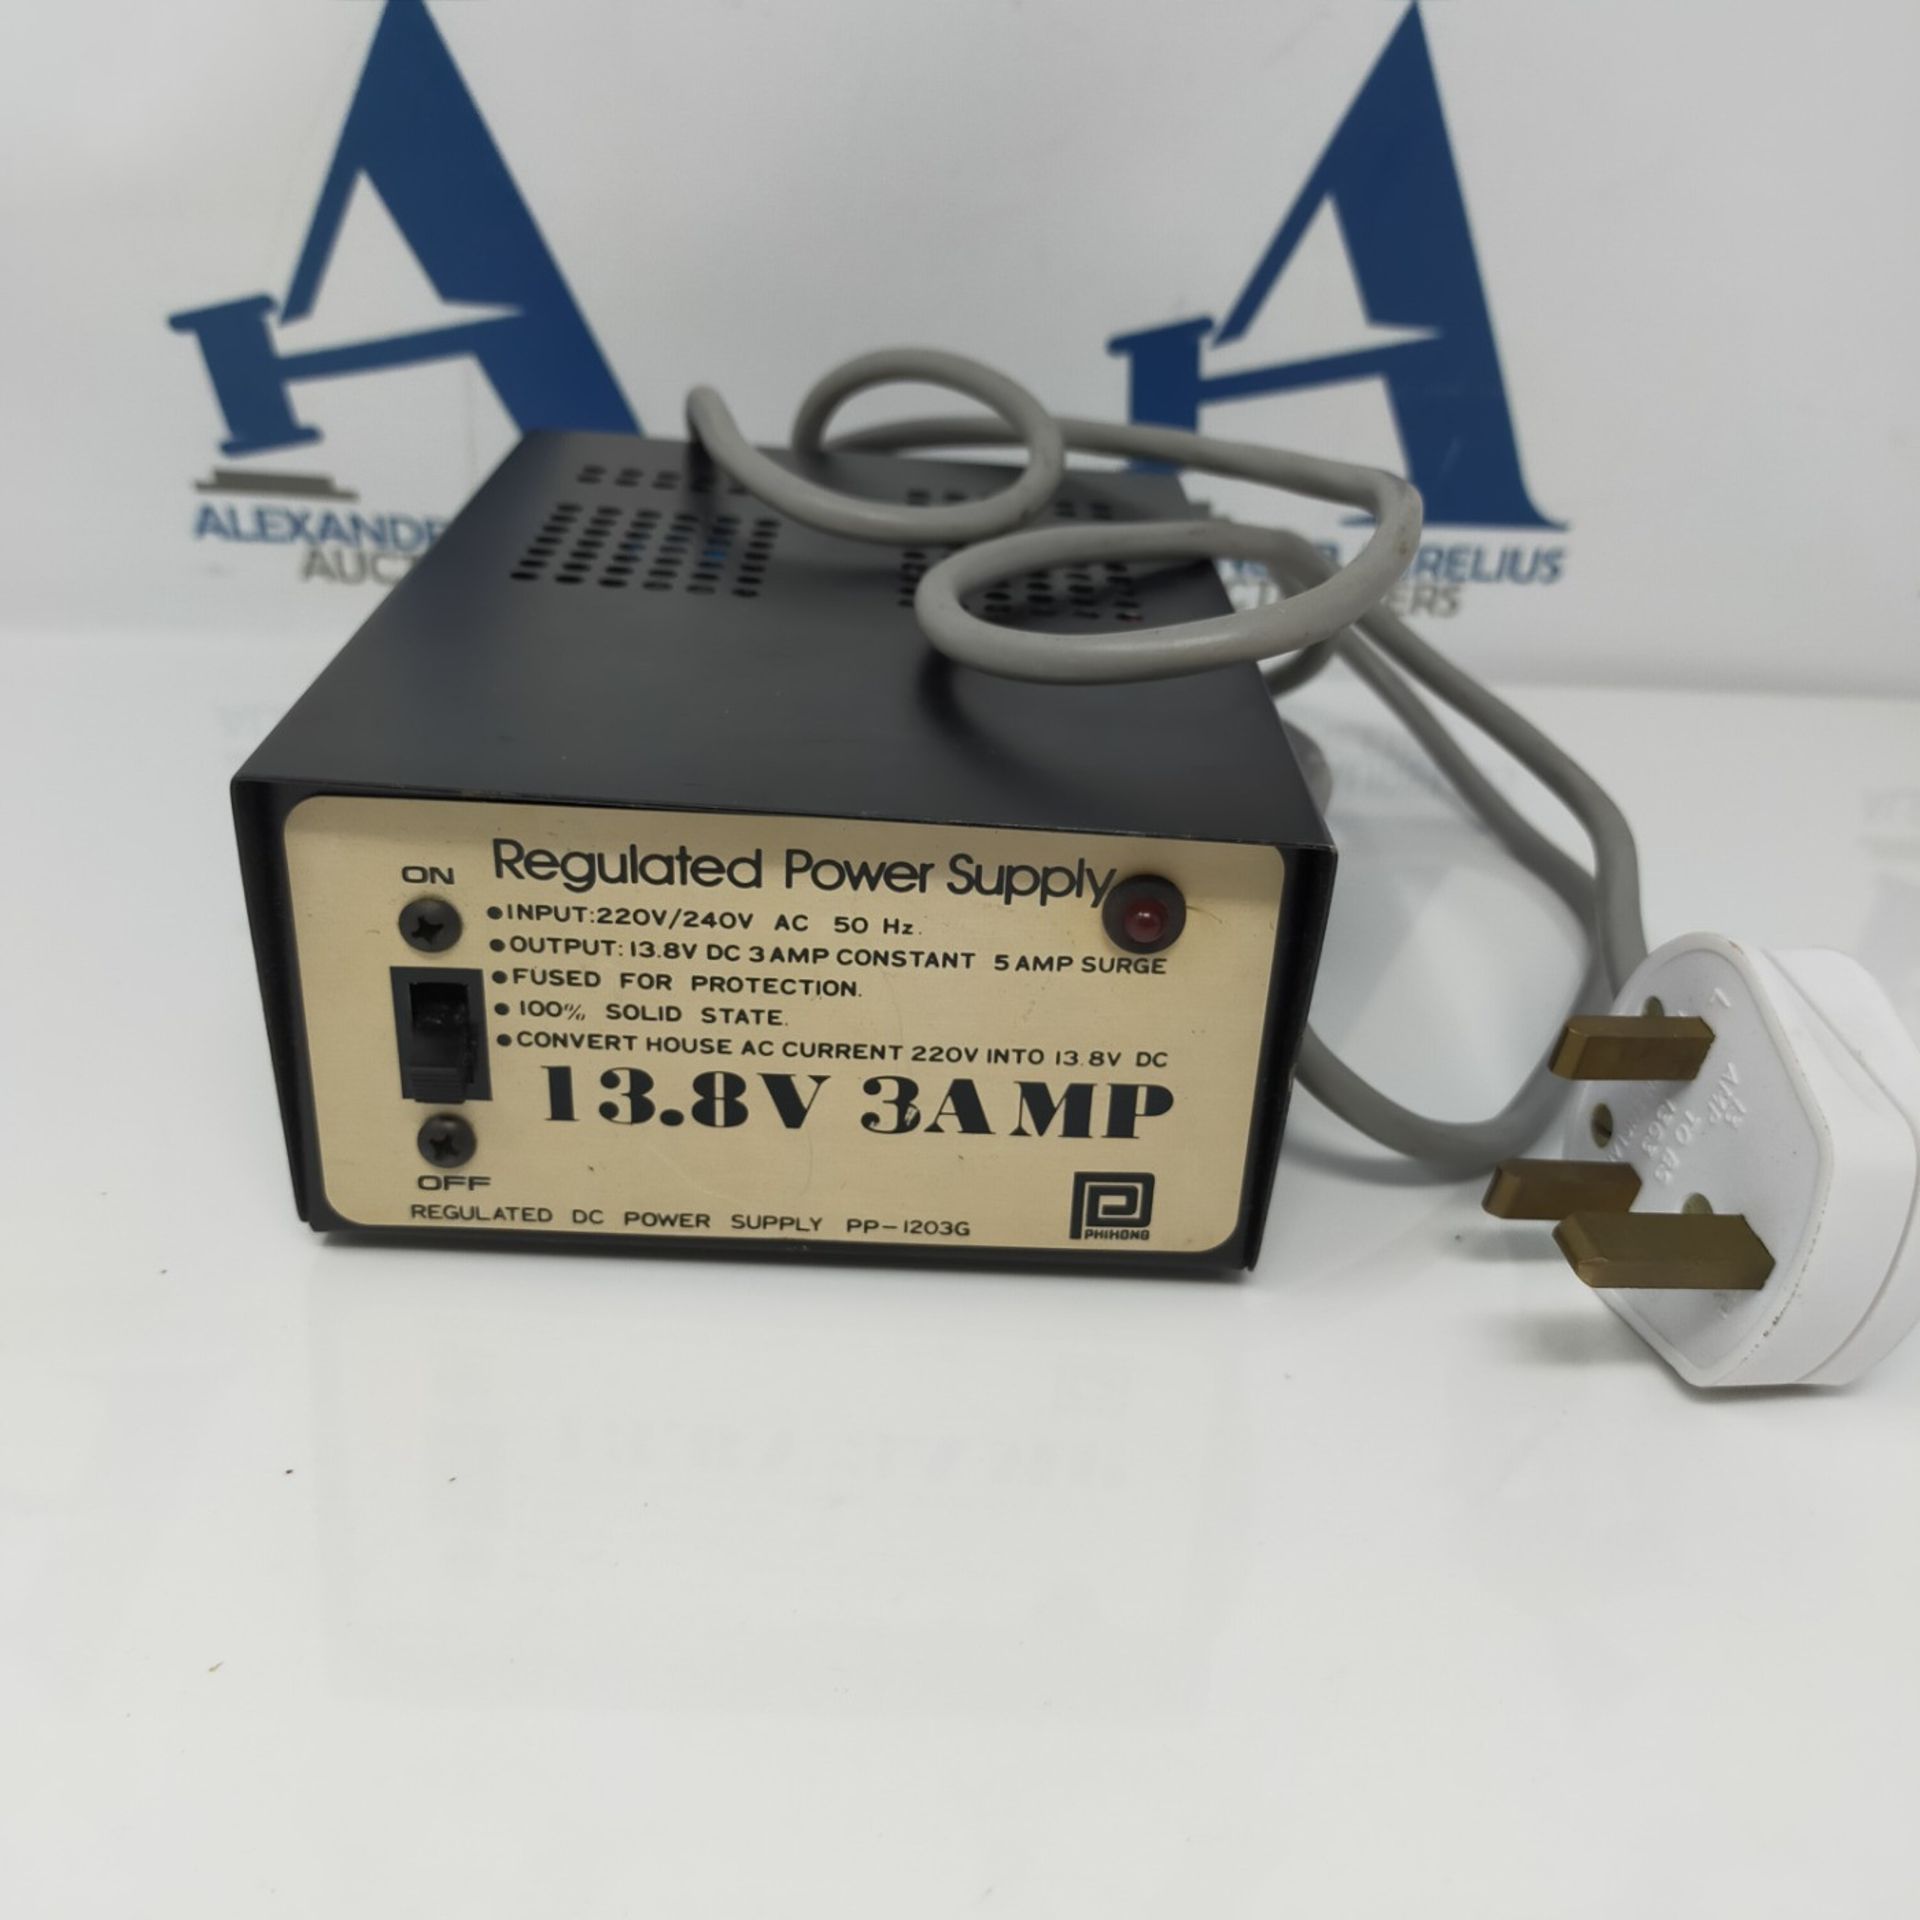 PP-1203G 3 AMP LINEAR POWER SUPPLY - Image 2 of 2